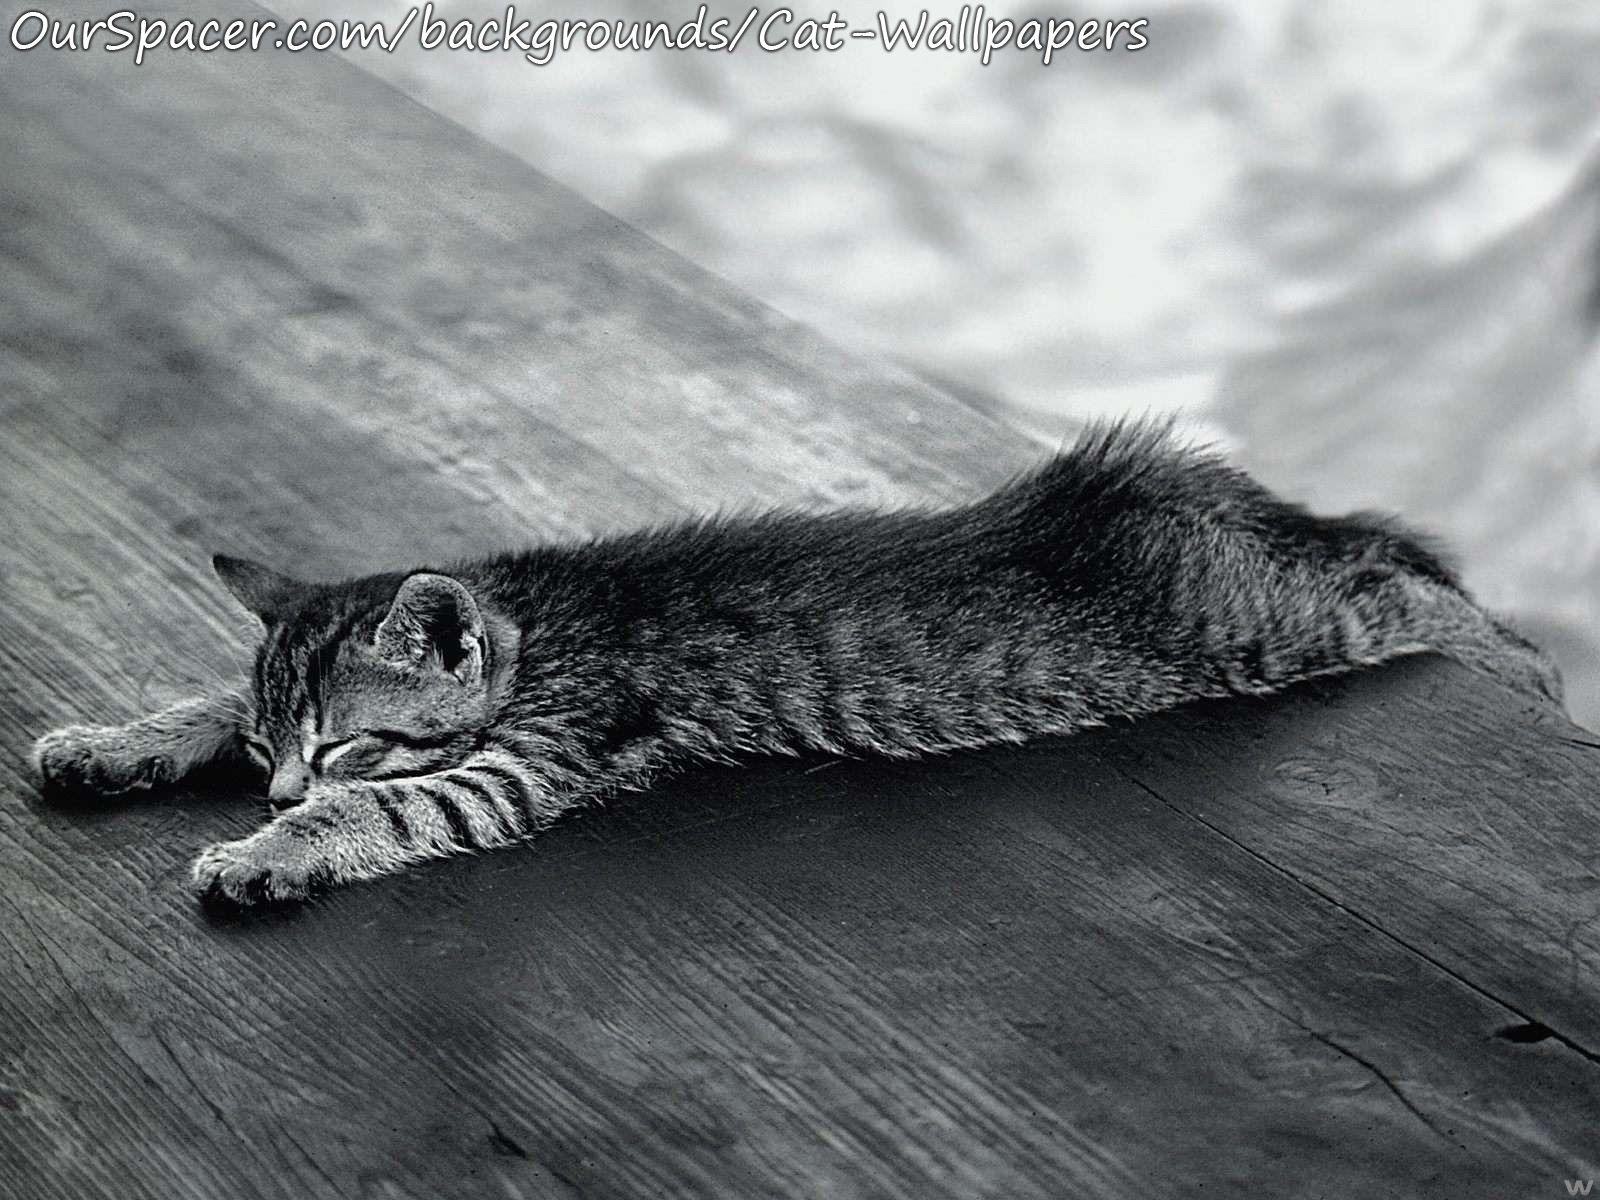 Black and white cat sprawled out on the deck wallpaper